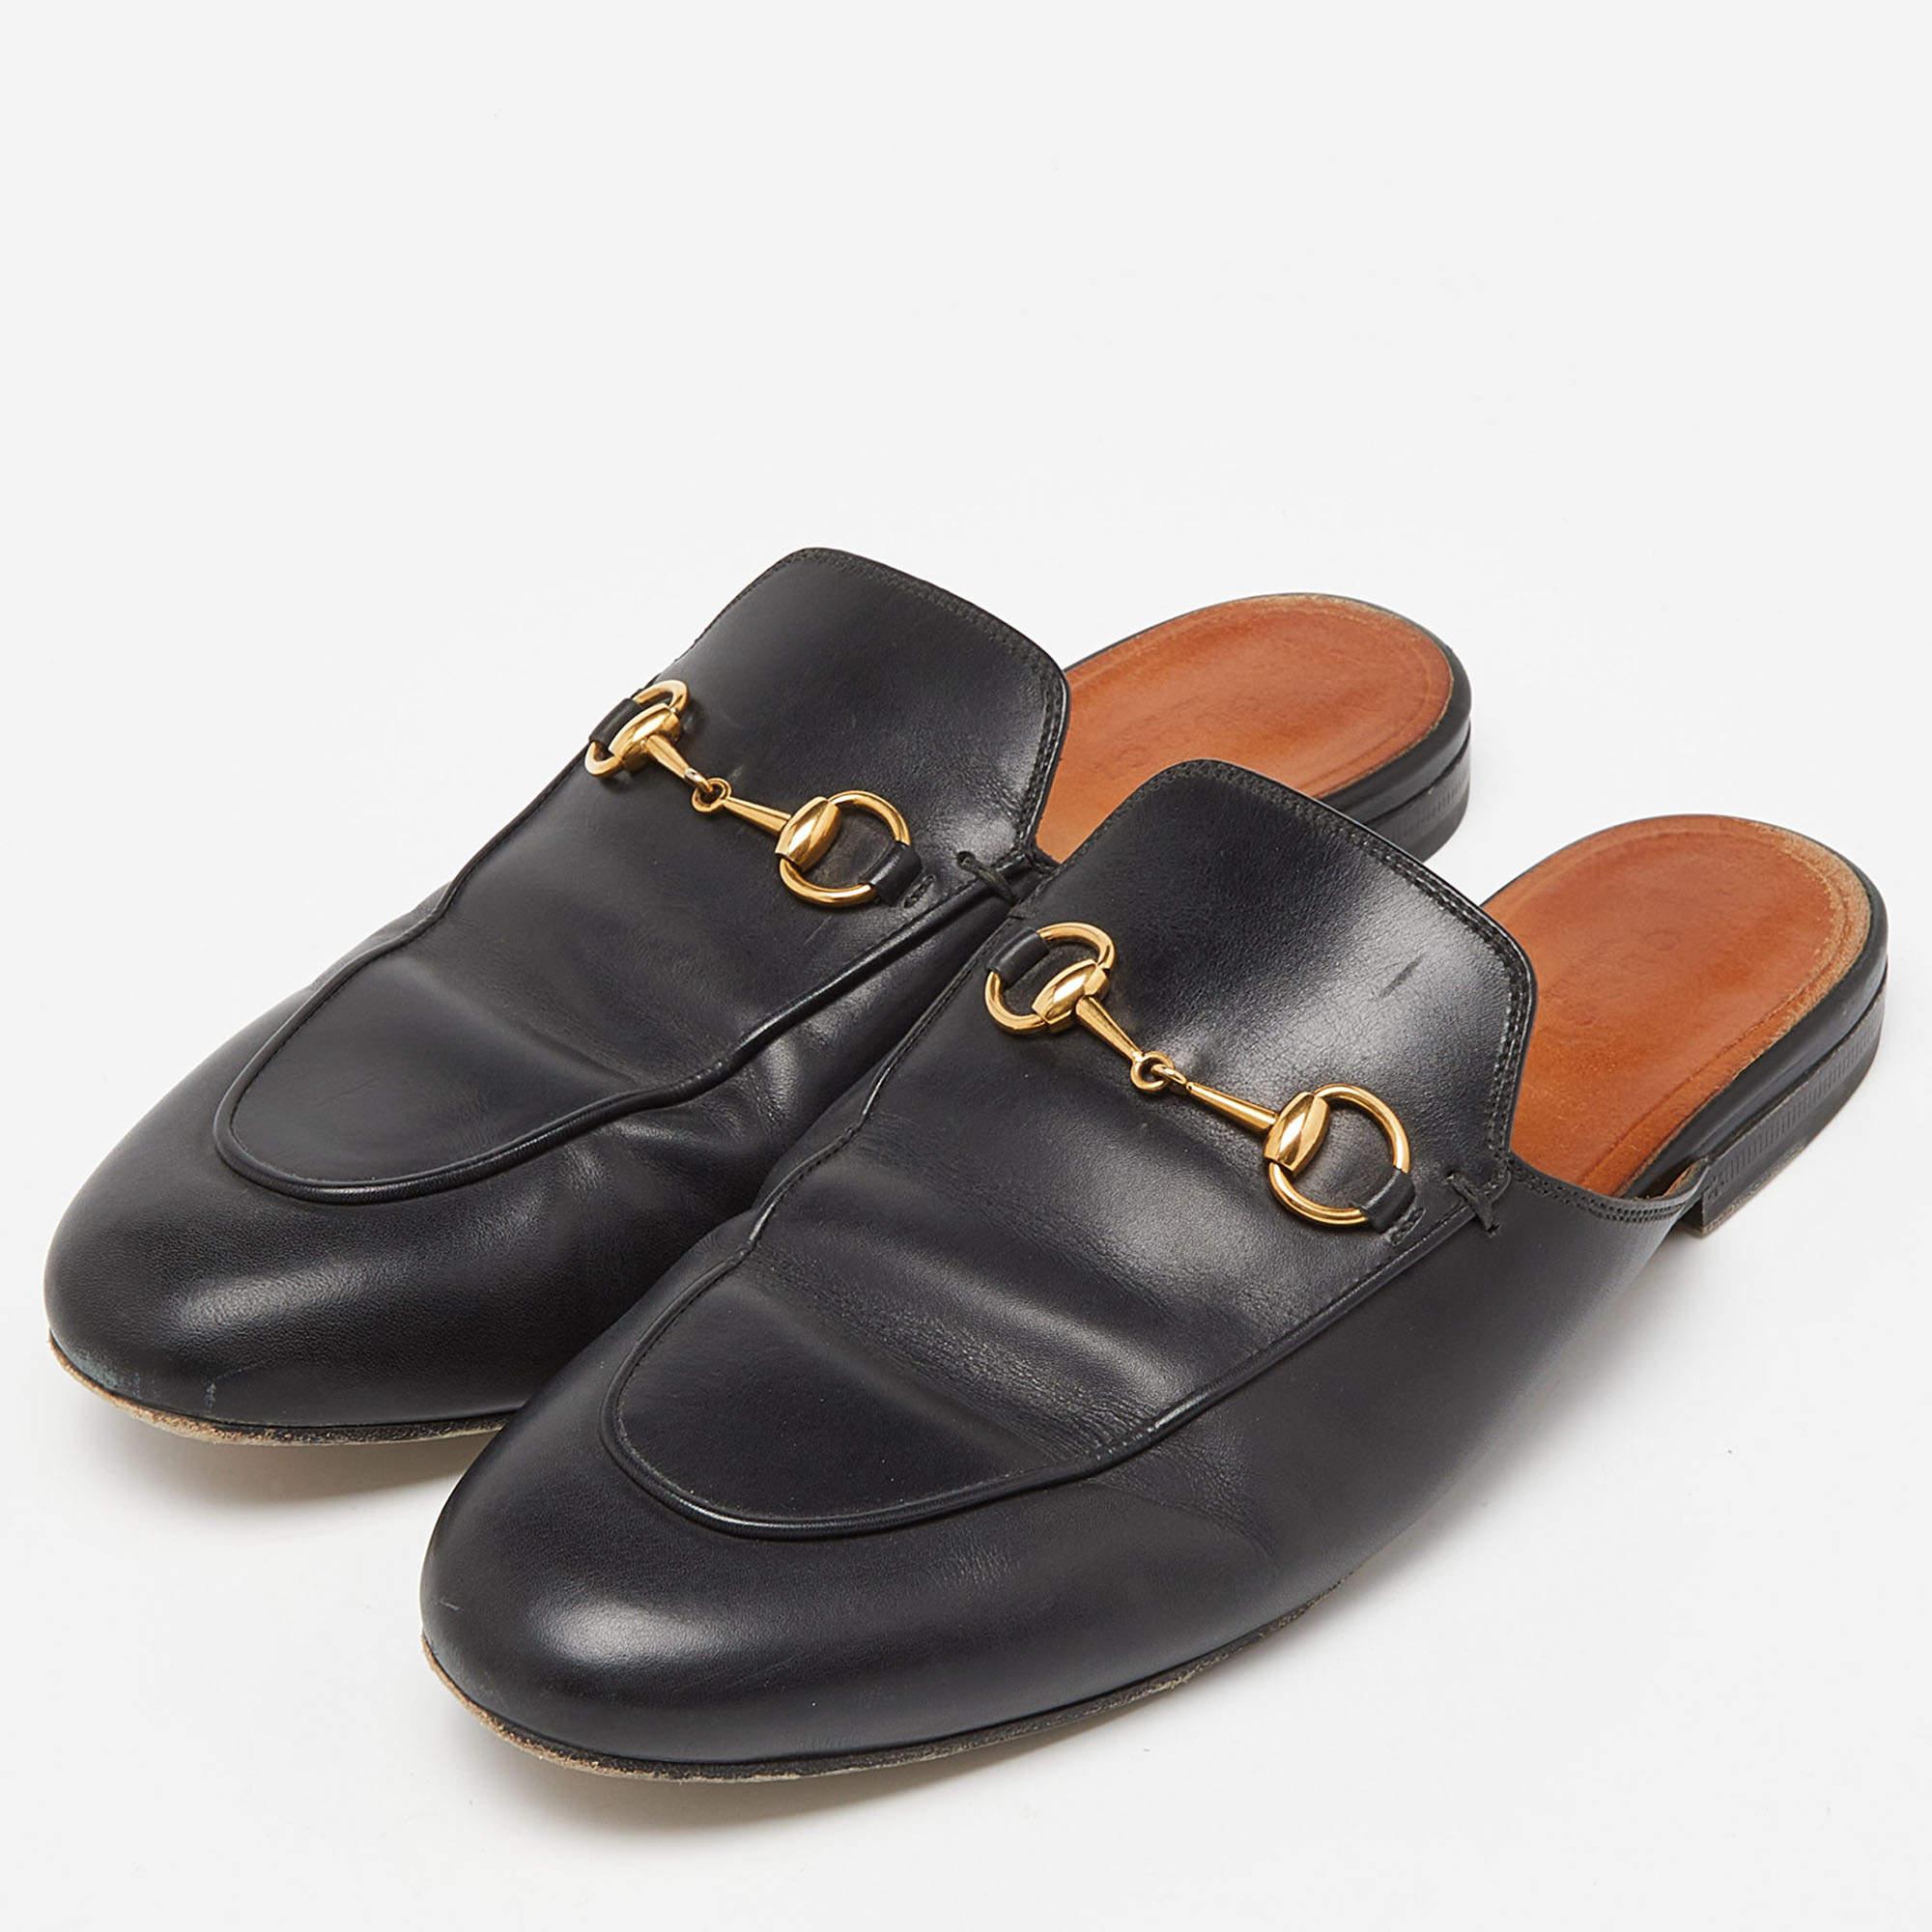 Gucci Black Leather Princetown Mules Size 40 1